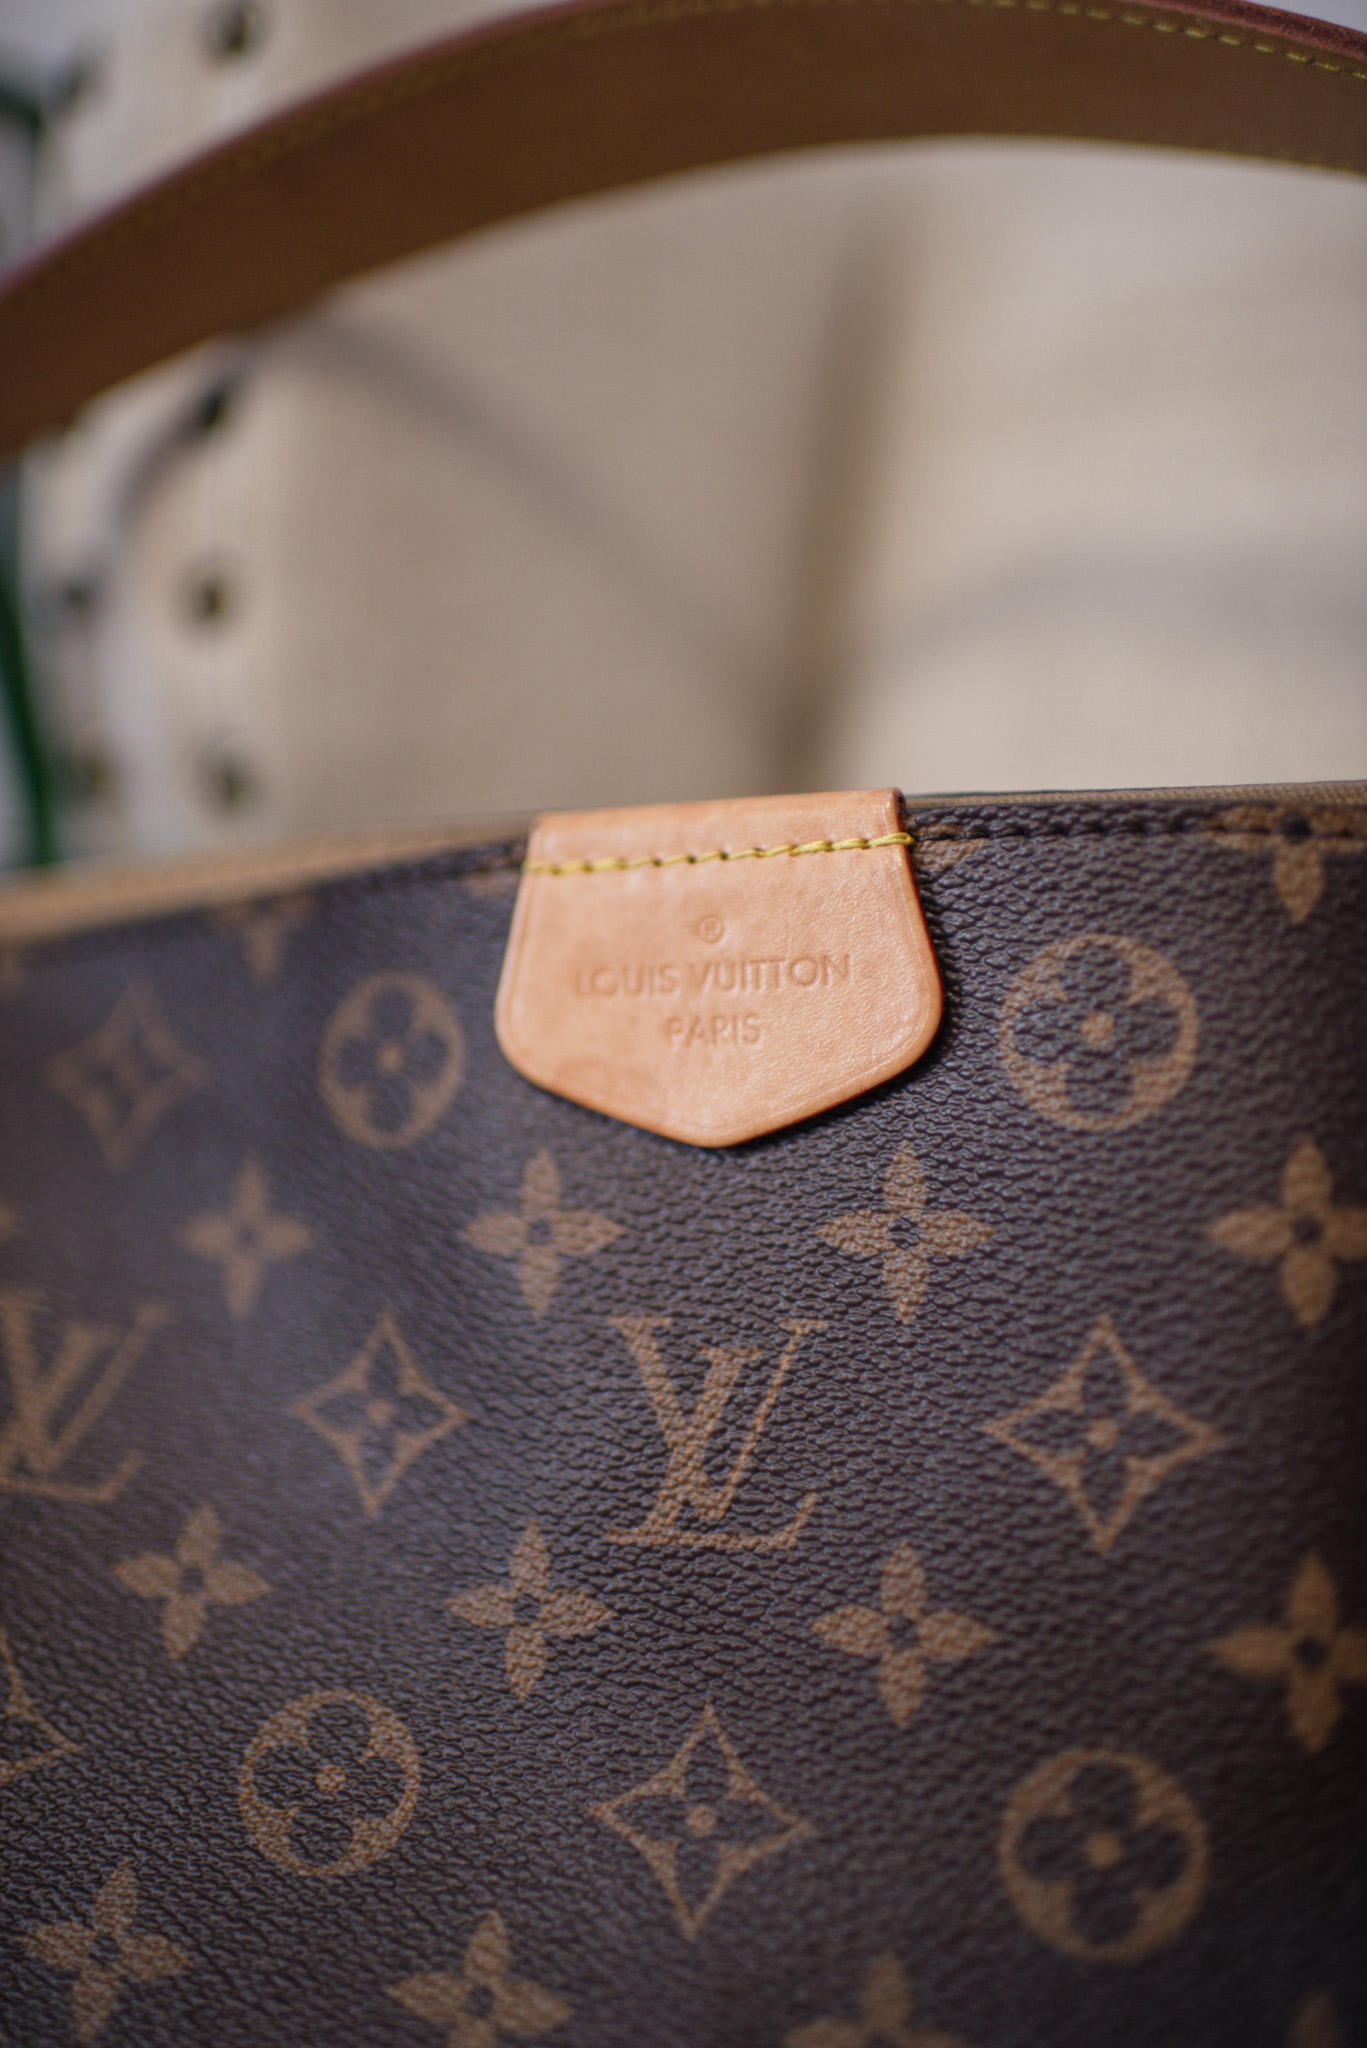 Reviewing my Louis Vuitton Graceful MM 💕 My latest bag in my collecti, louisvuitton